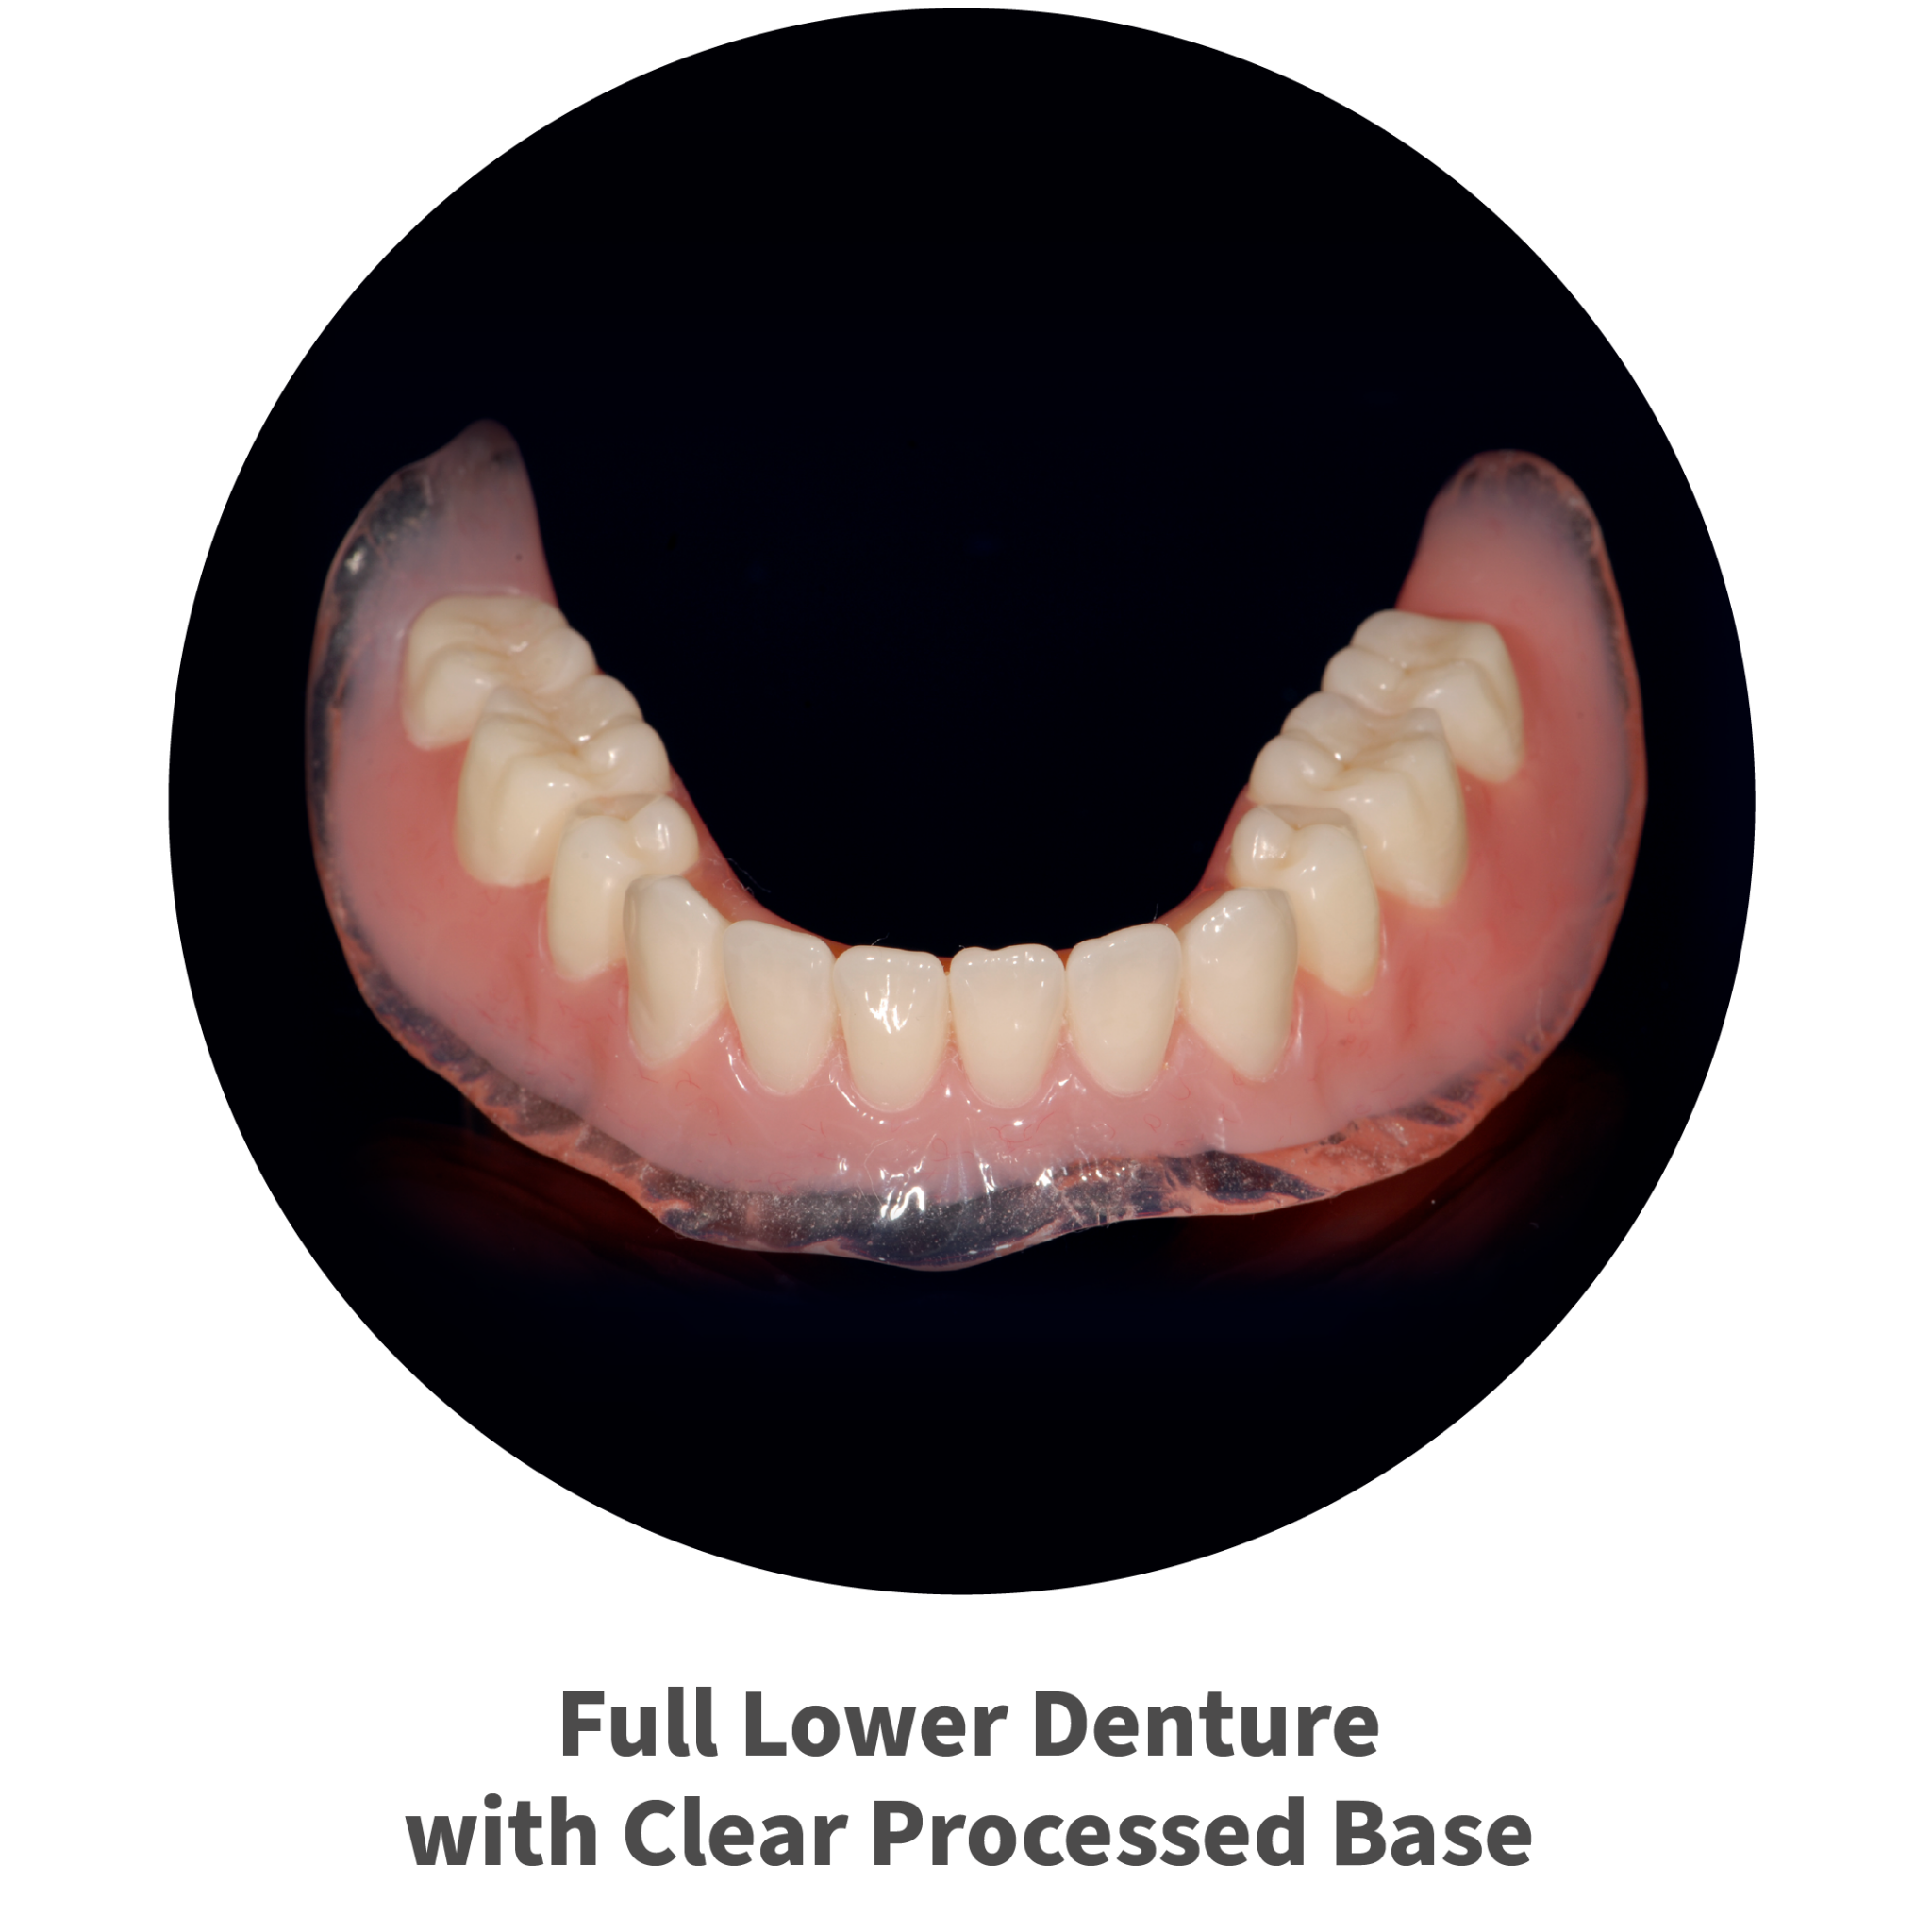 Full Lower Denture with Clear Processed Base